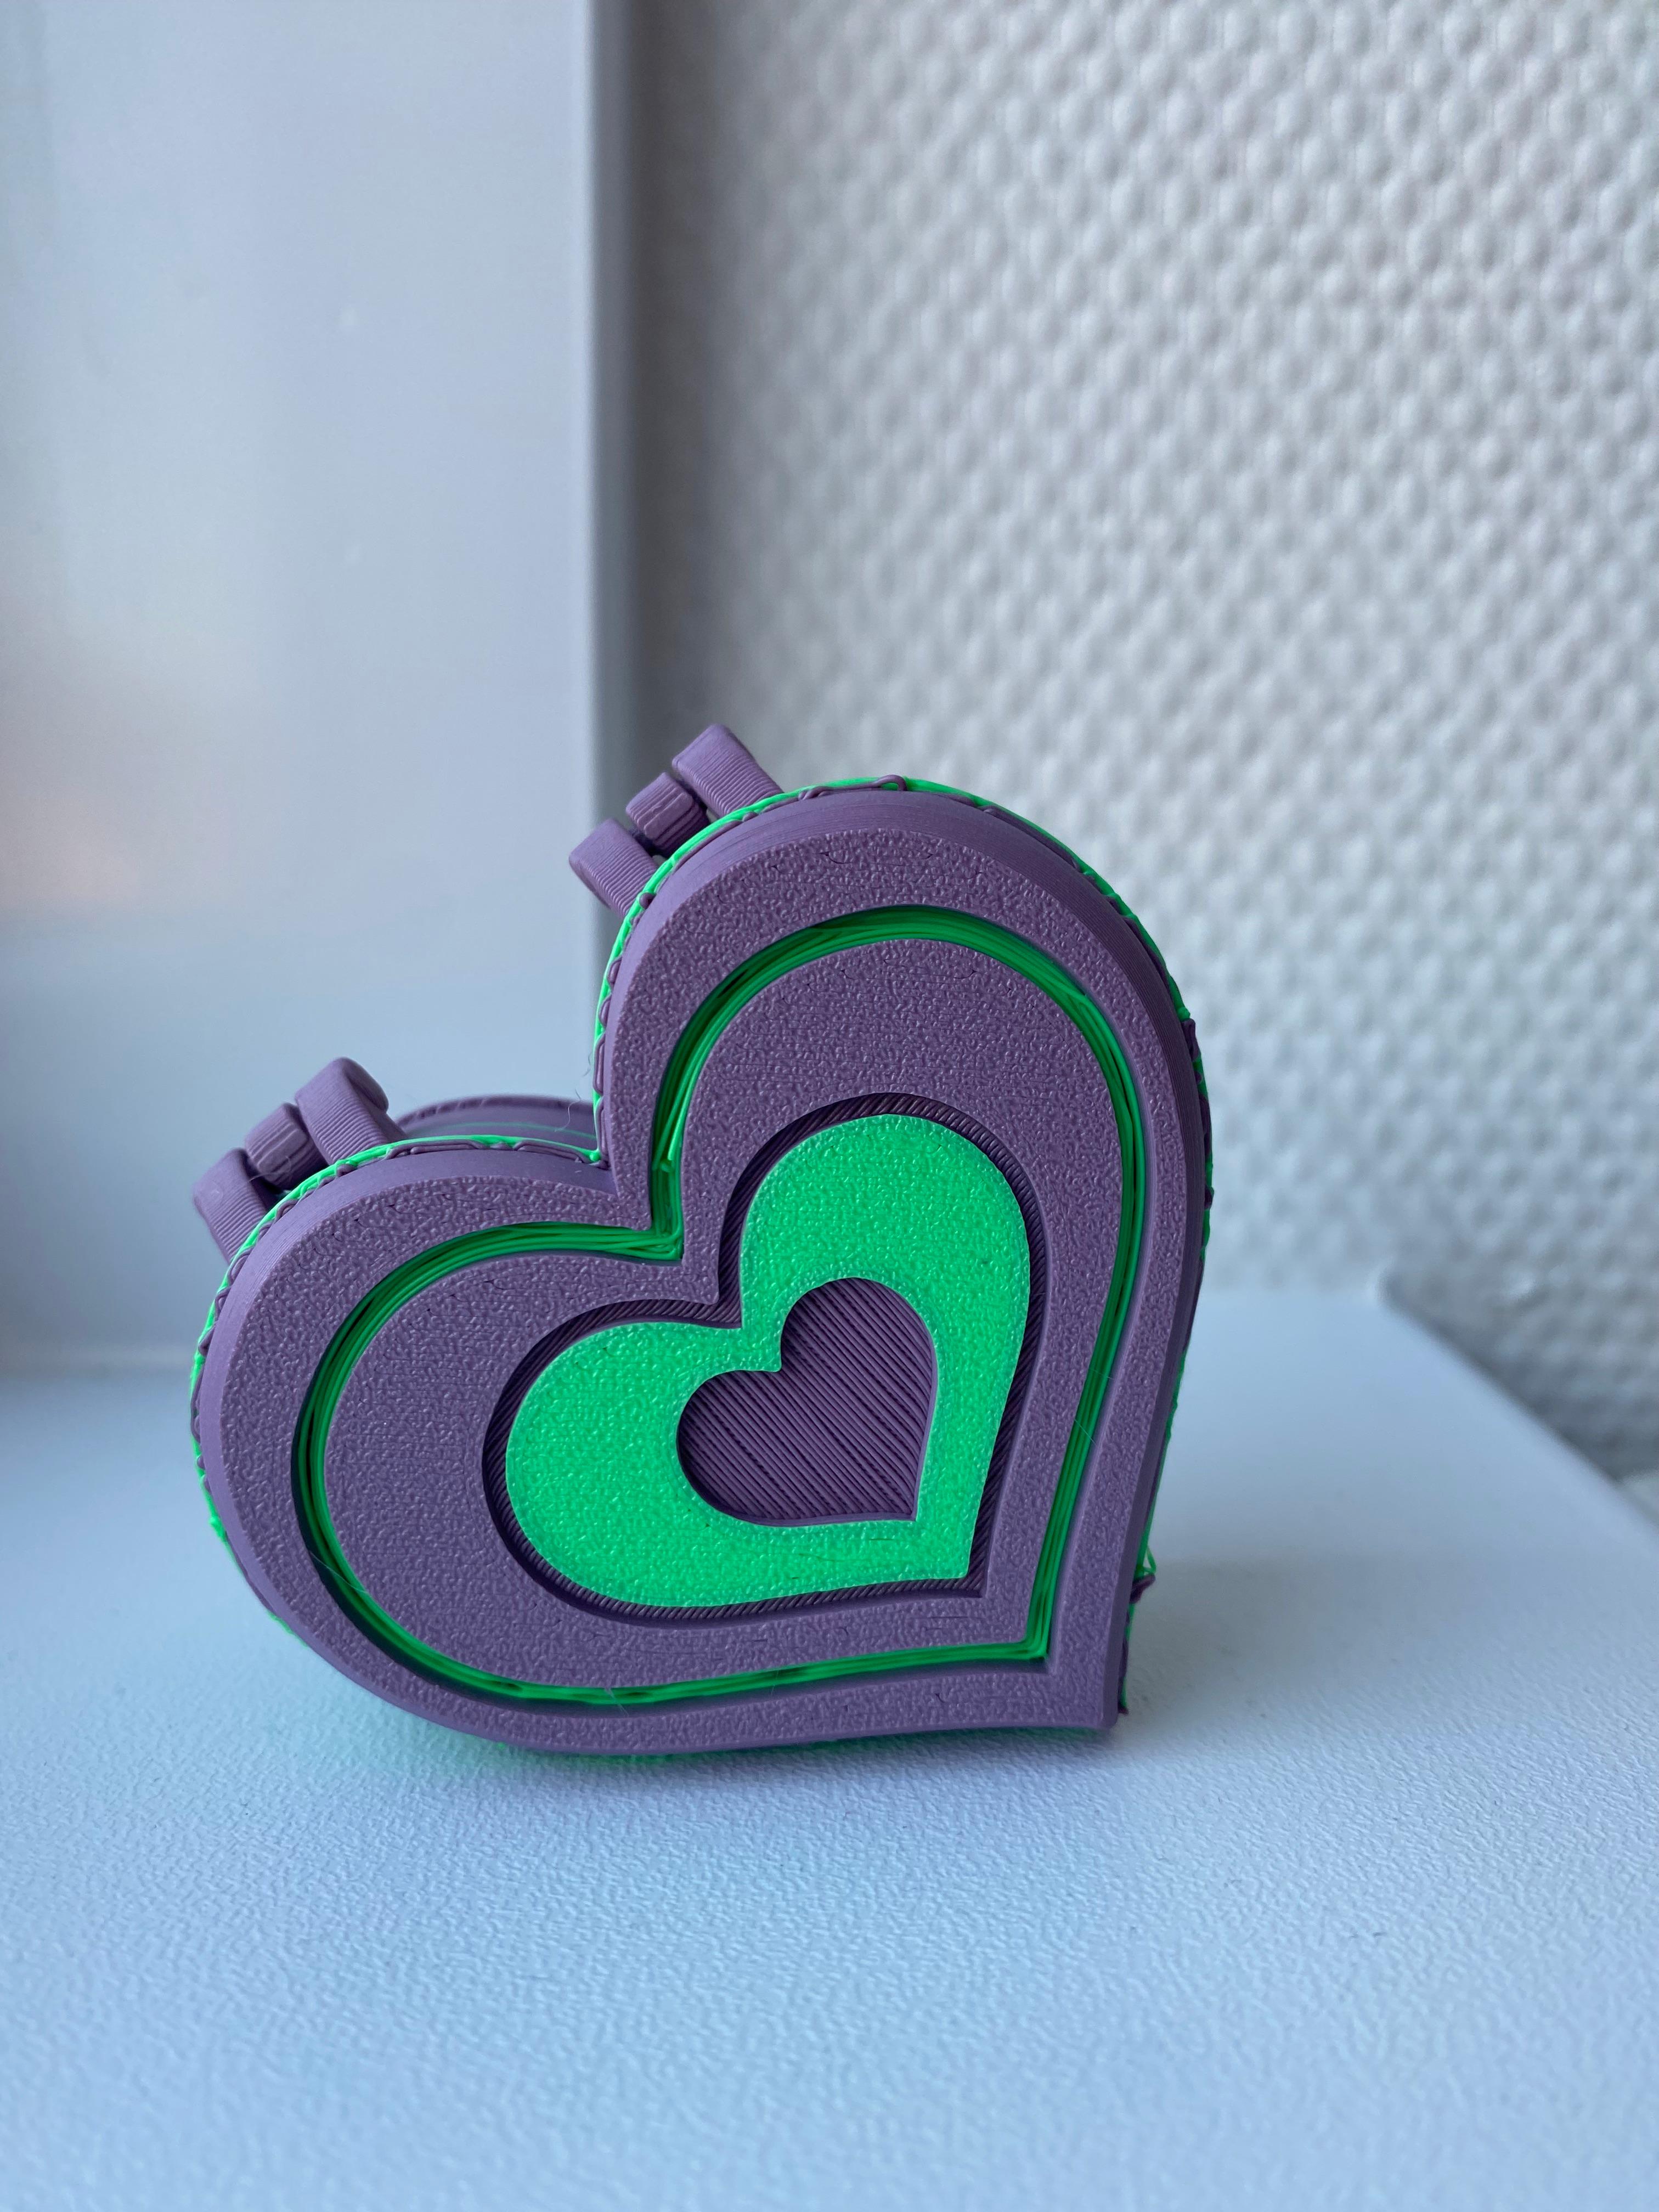 Valentine's Heart Shaped Box (Remix of Simple Heart Box with Lid) - Love this design! 
Printed in 2 colors.
Polymaker muted purple & Extrudr signal green. - 3d model